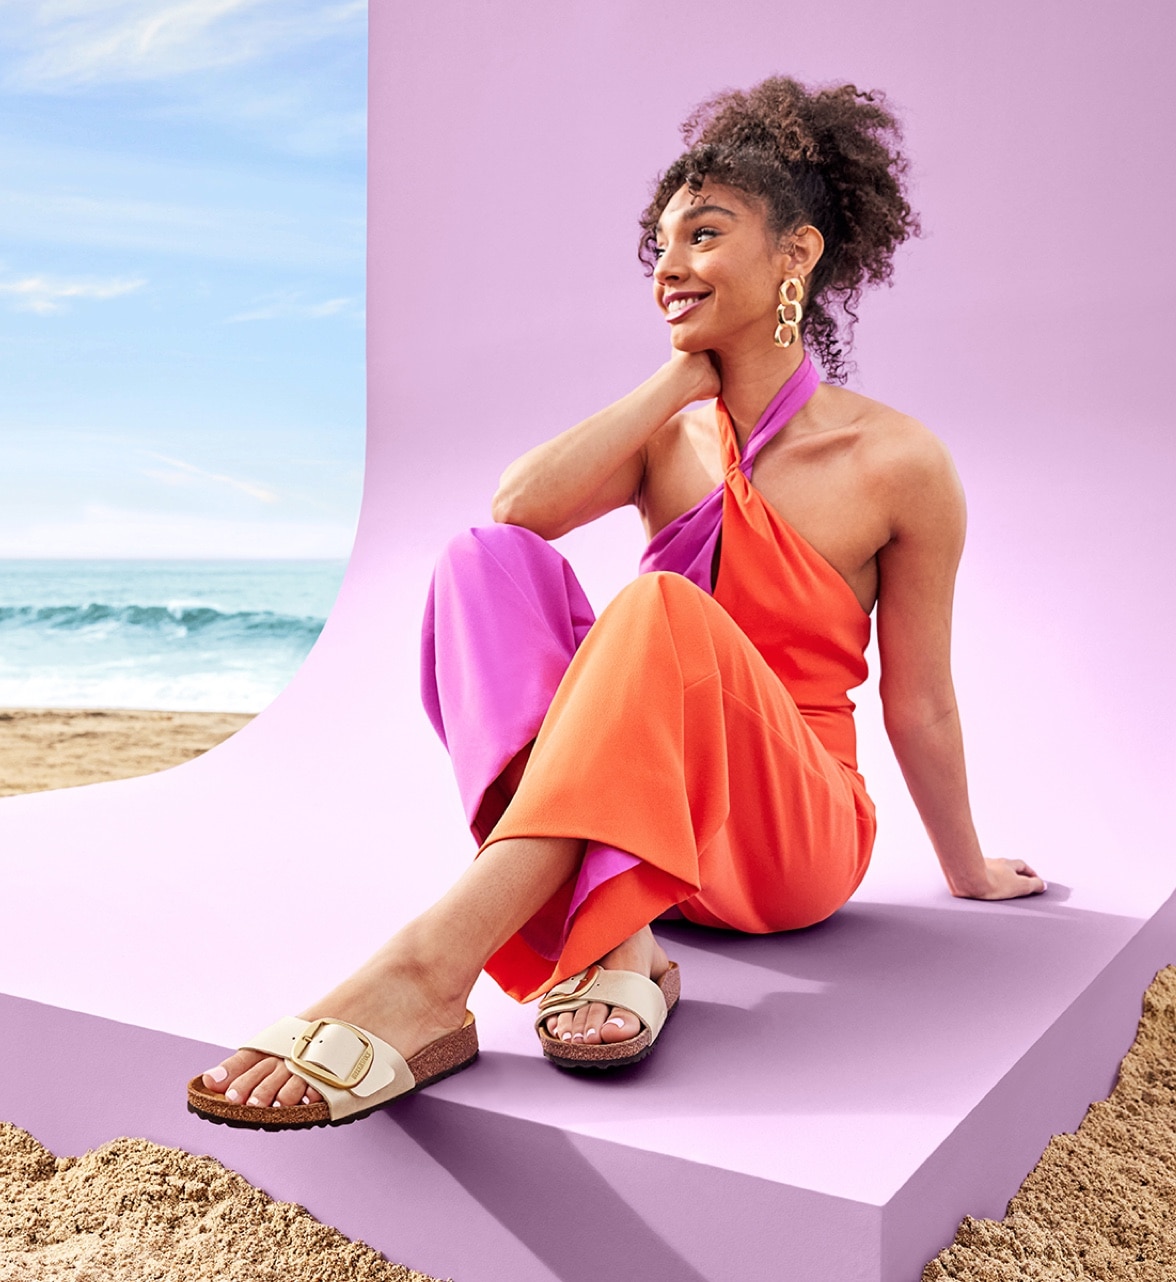 woman in bright purple and orange jumpsuit sitting on beach wearing birkenstock sandals with big buckles